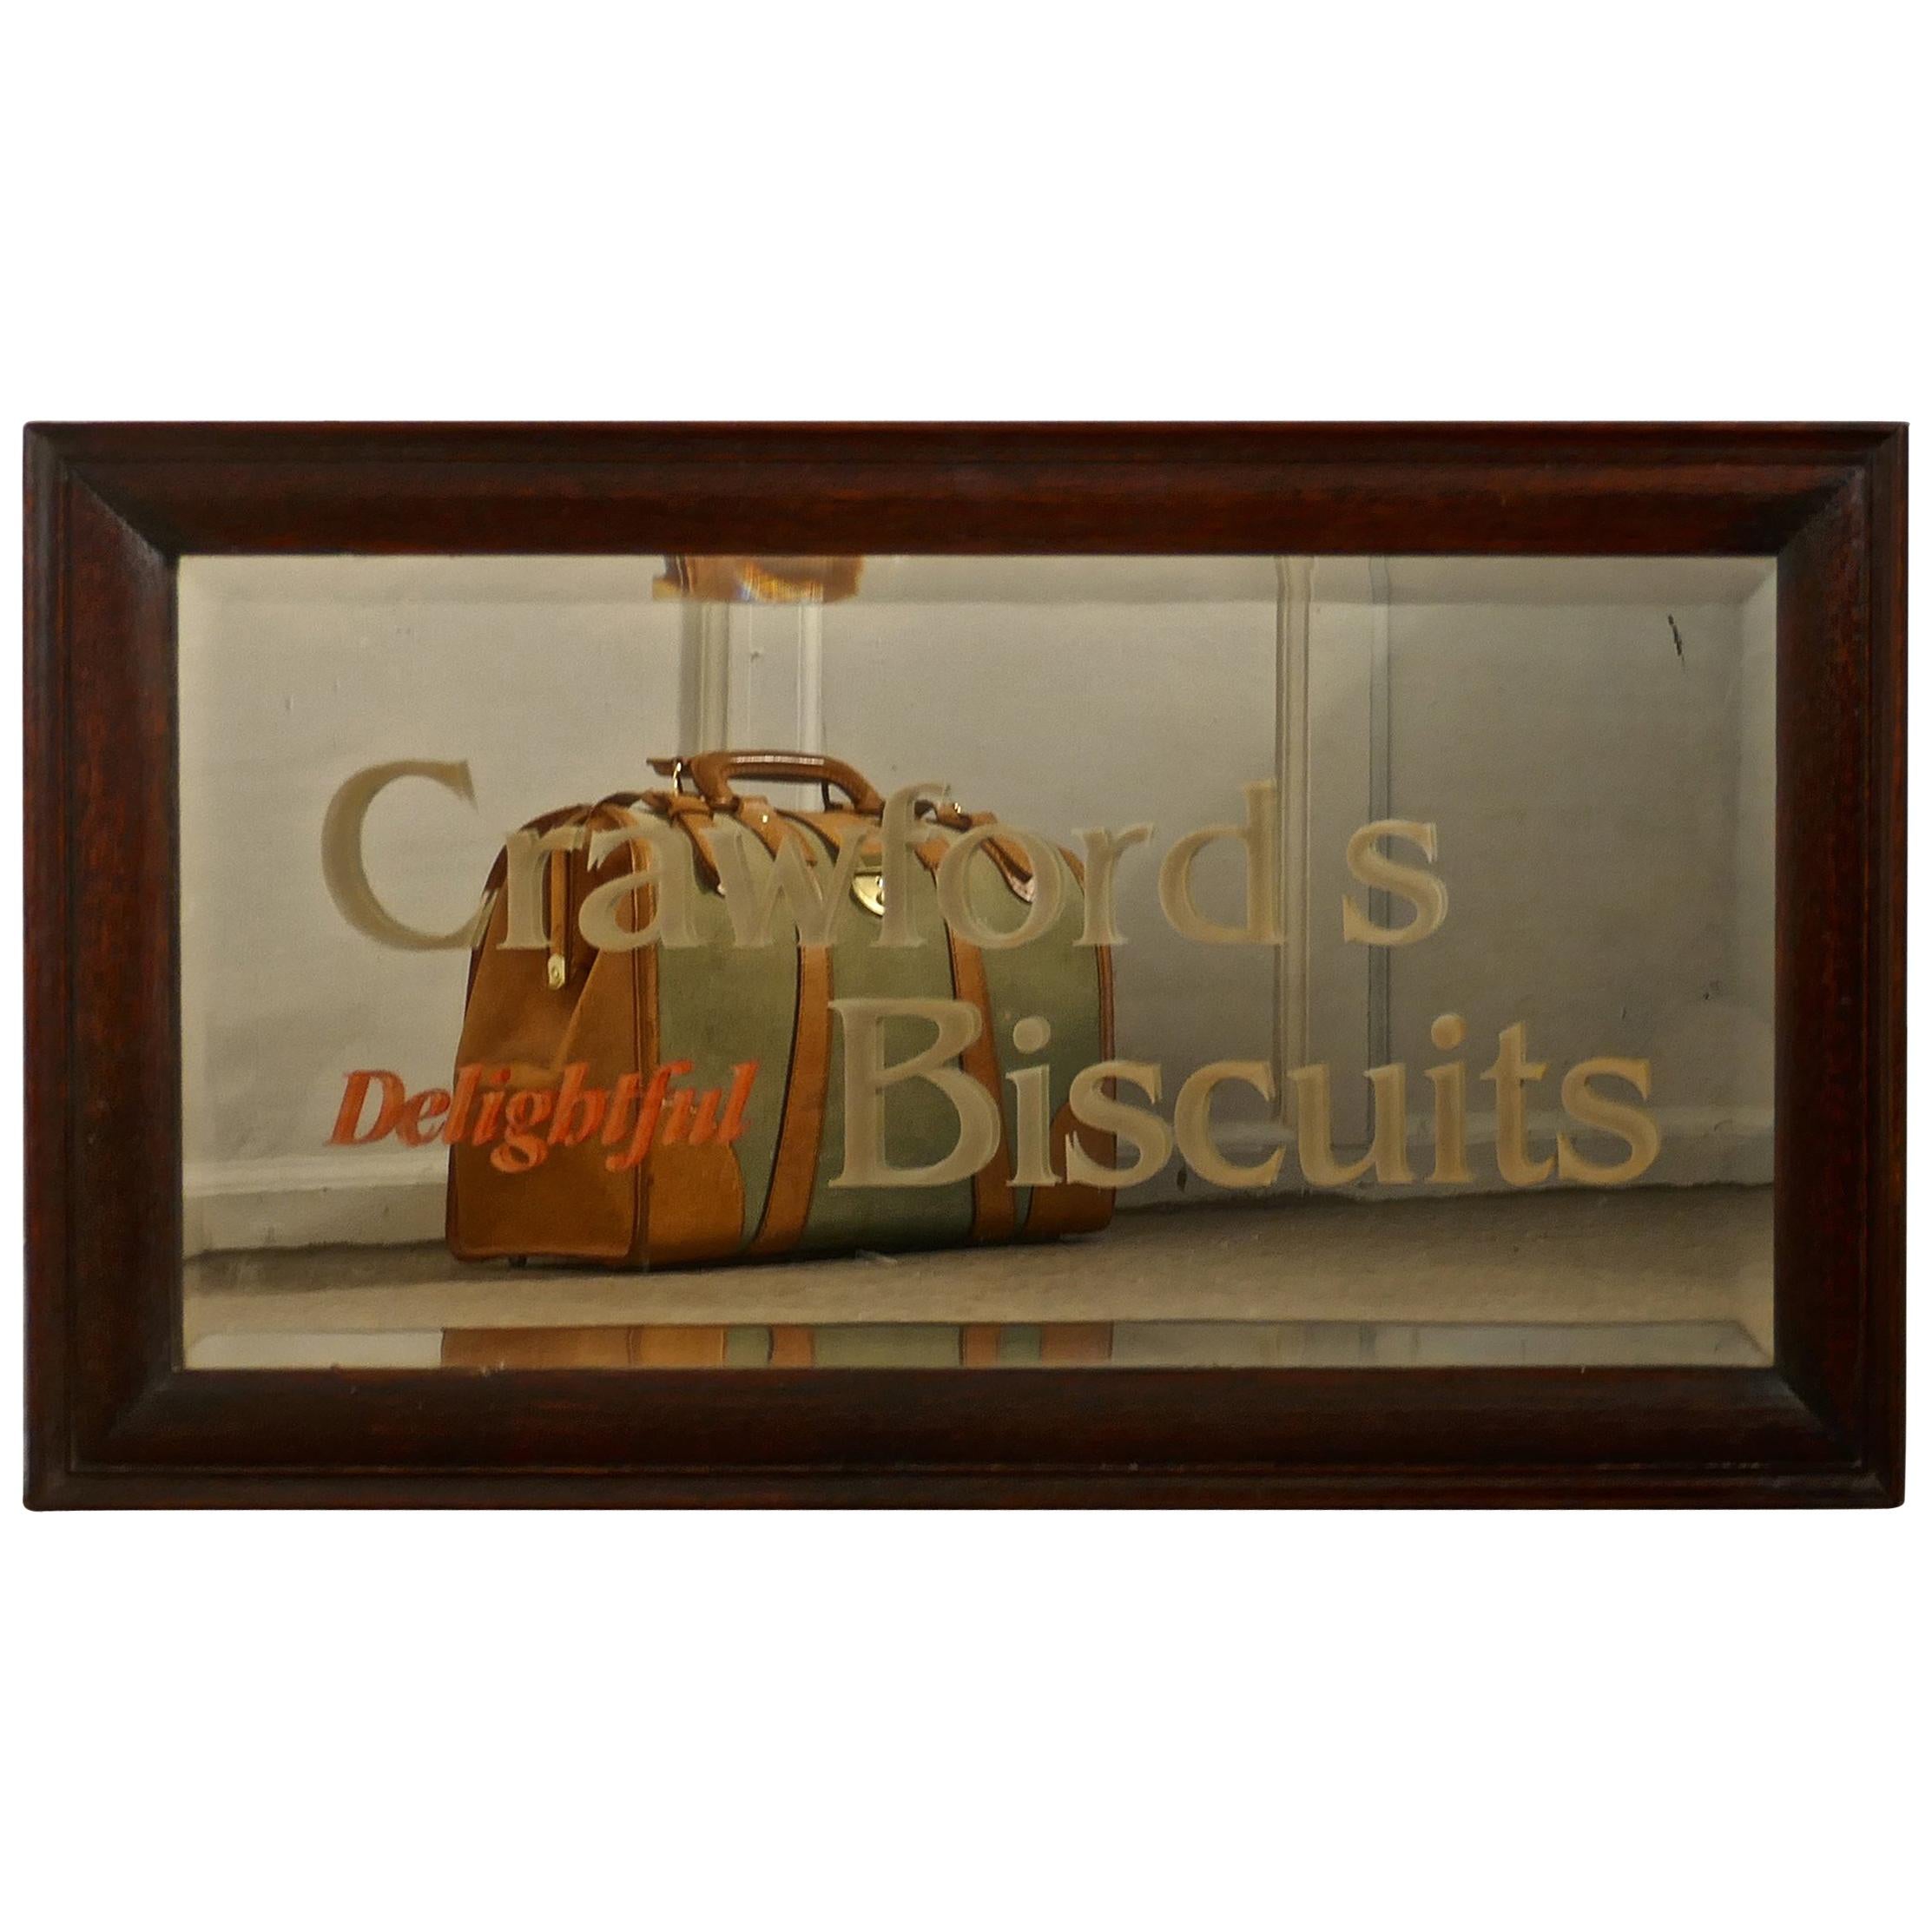 Advertising Mirror “Crawford’s Delightful Biscuits” Baker or Cafe  For Sale